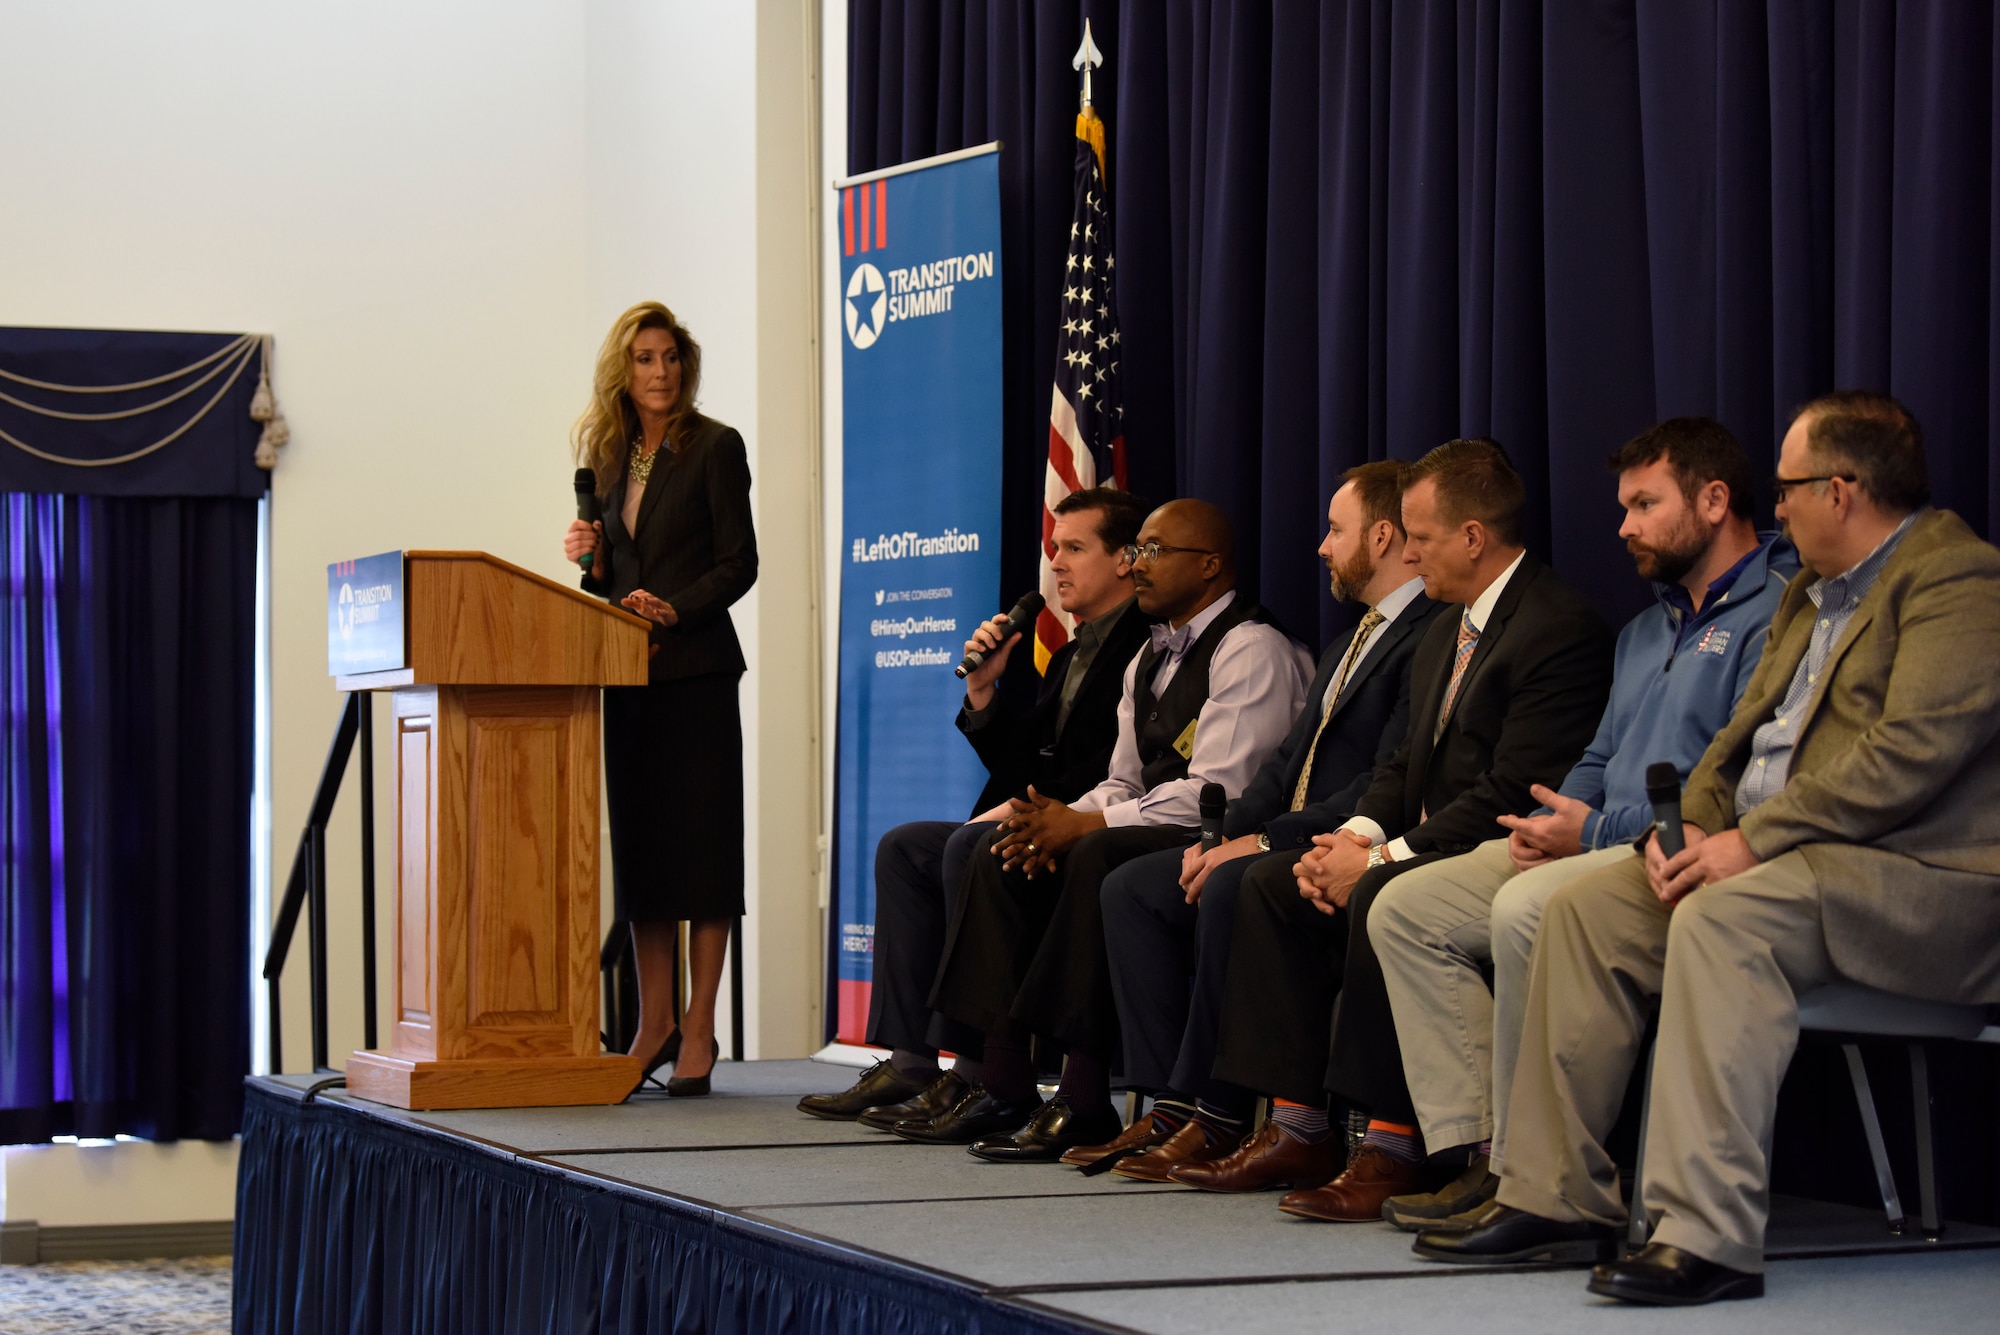 Panel members answer questions from Team Dover during the Hiring Our Heroes Military Transition Summit April 12, 2018, at Dover Air Force Base, Del. The panel included representatives from Comcast NBCUniversal, Ammonia Refrigeration Foundation, Delmarva Veteran Builders, Fireside Partners, U.S. Department of Labor and the Lufthansa Group. (U.S. Air Force photo by Airman 1st Class Zoe M. Wockenfuss)